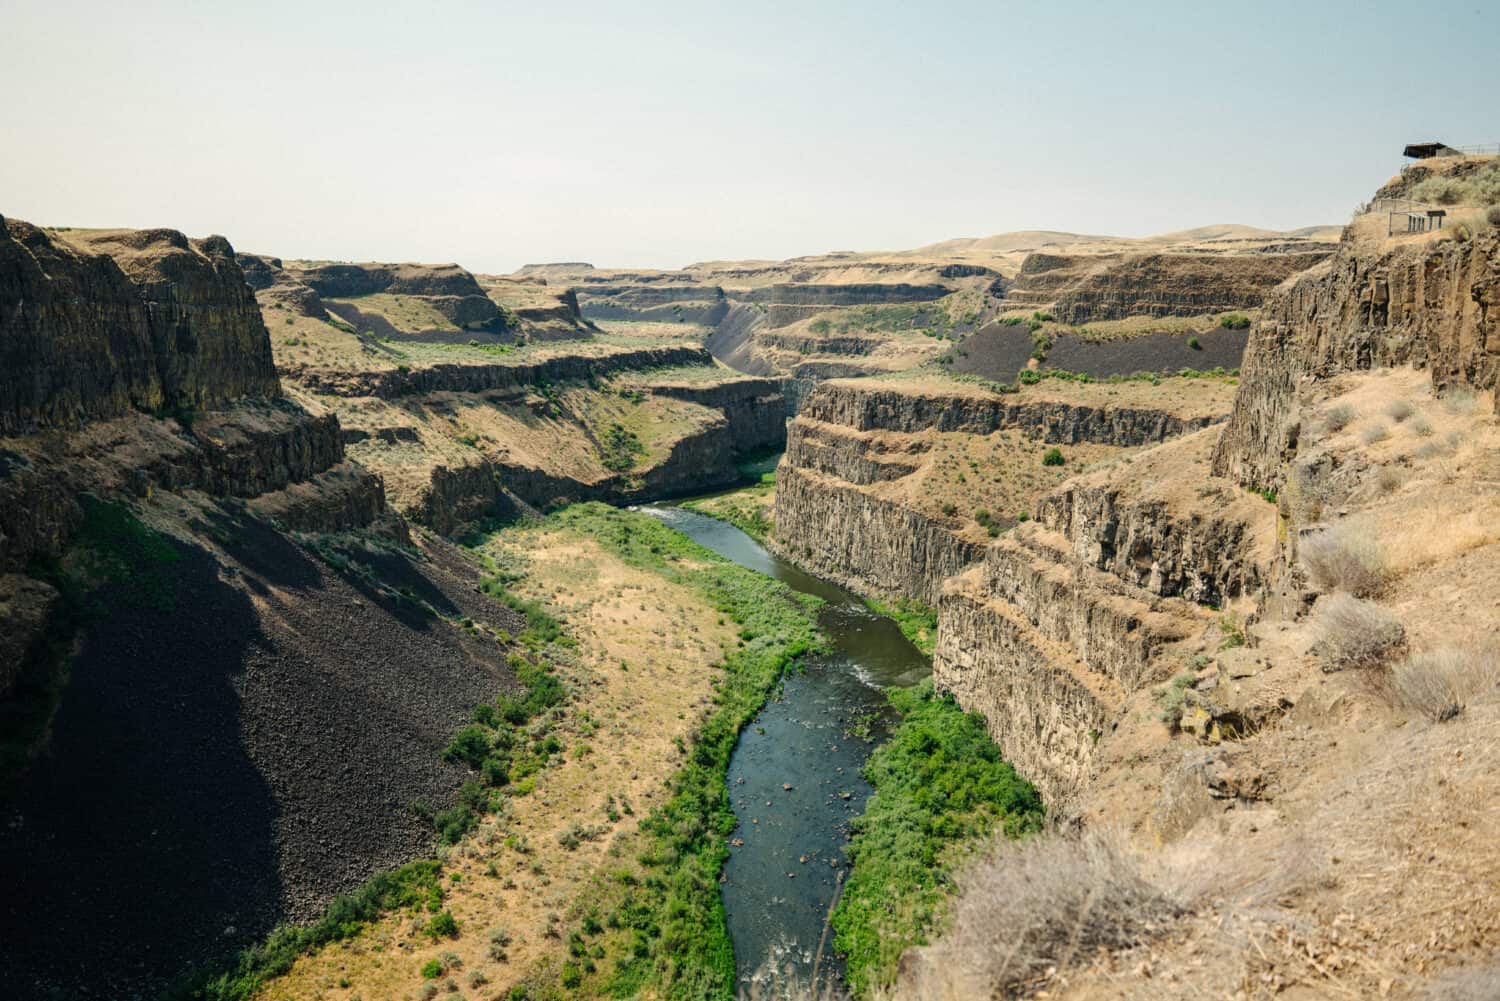 More Stops in Eastern Washington - Palouse Falls State Park